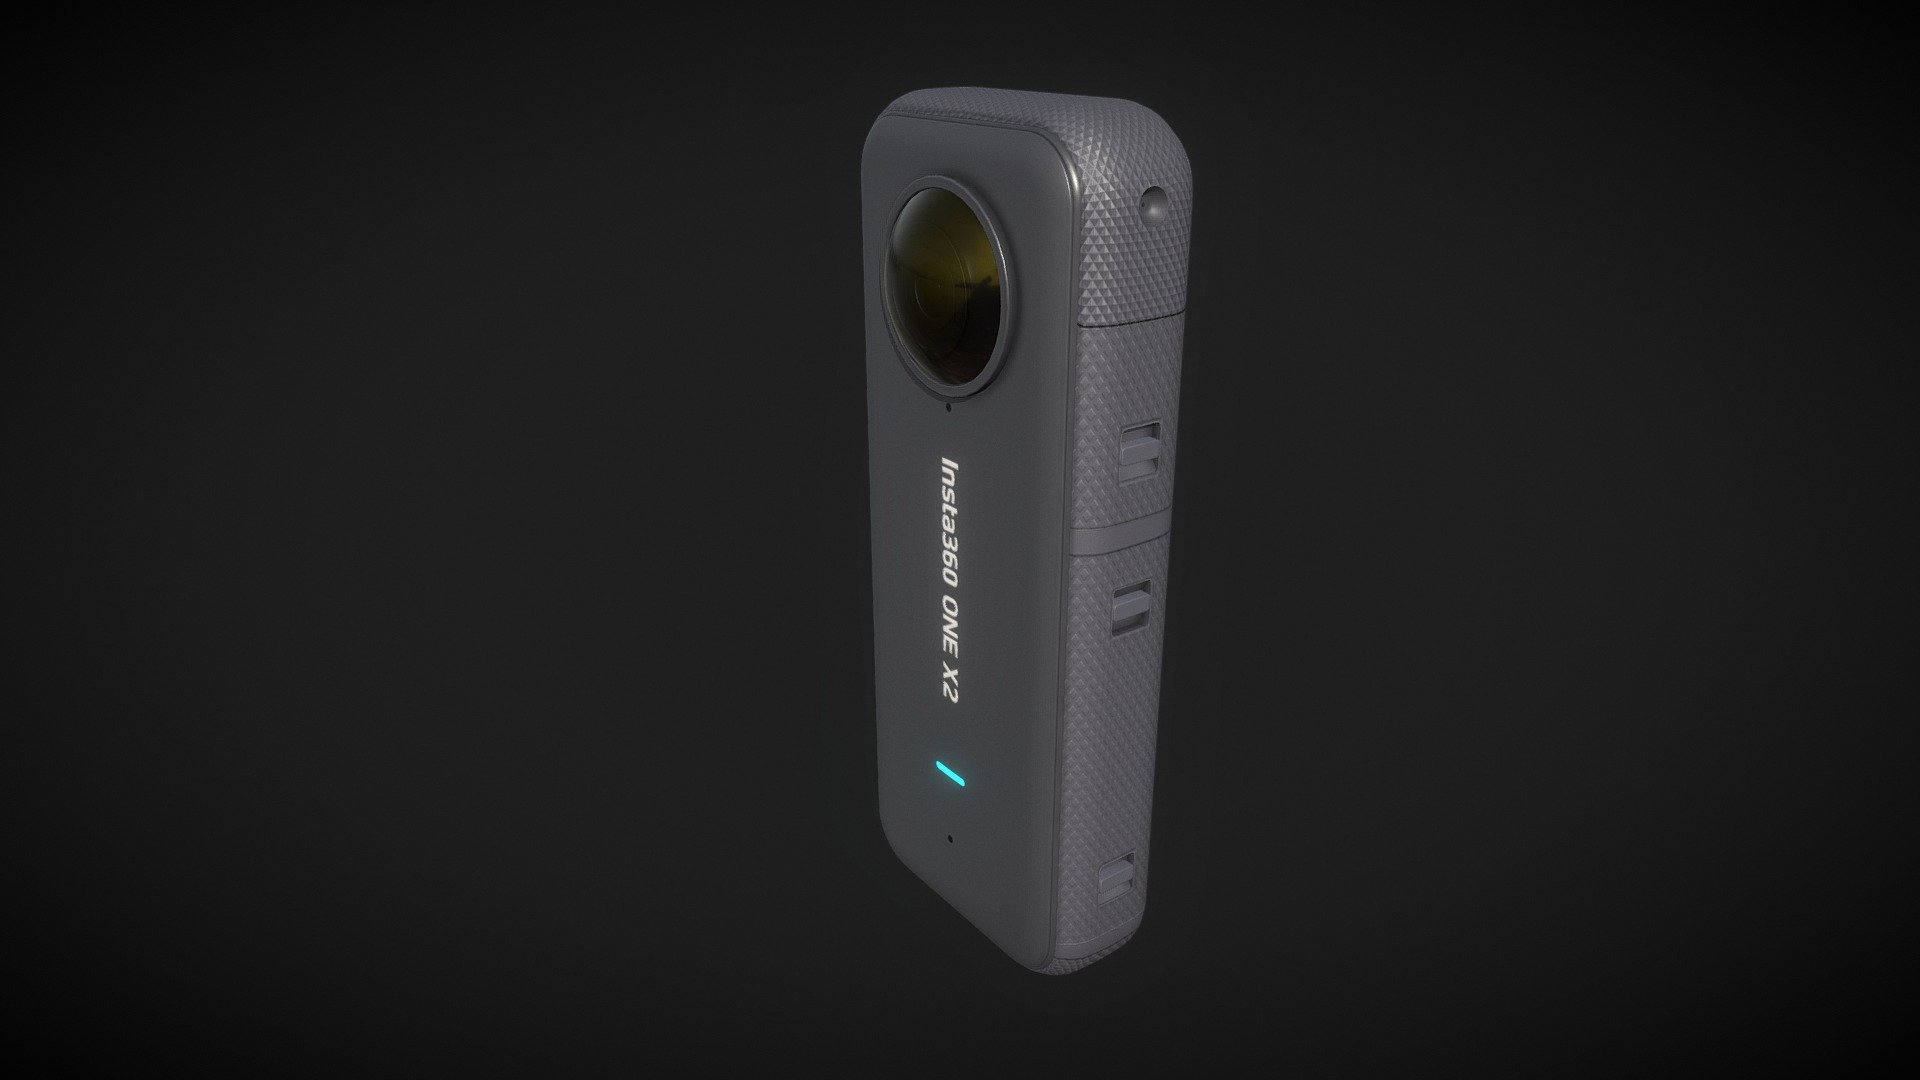 high-poly model of Insta360 ONE X2 is your pocket 360 steady cam.
*model done in Blender.
* textured in Substance painter - Insta360 one x2 sports and action camera - 3D model by Shift4cube 3d model